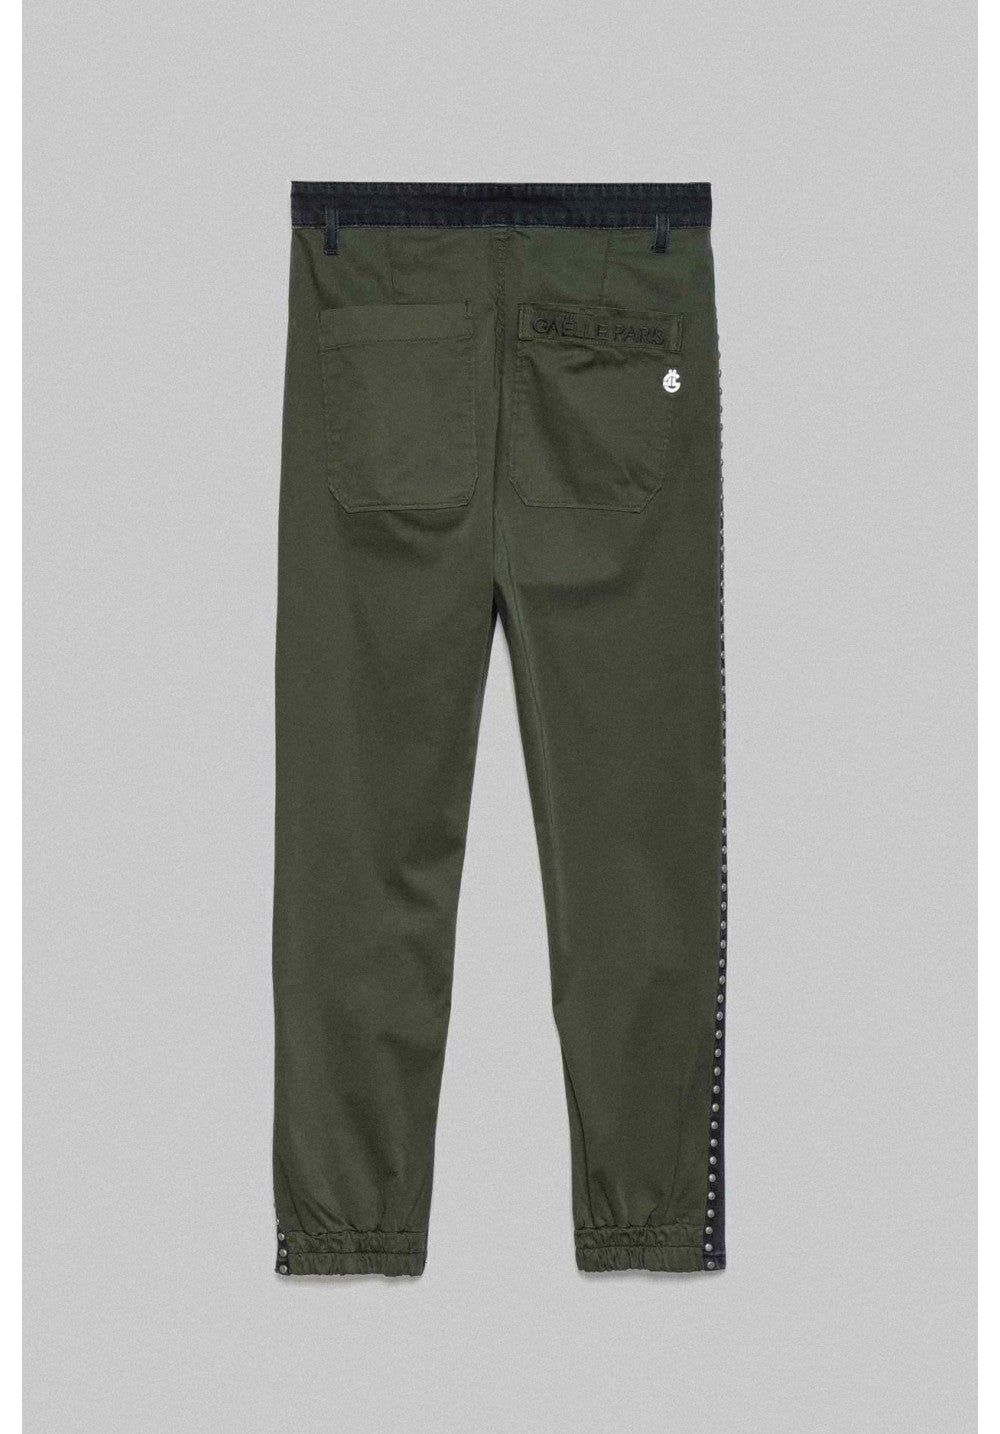 Army Black-Green Jeans